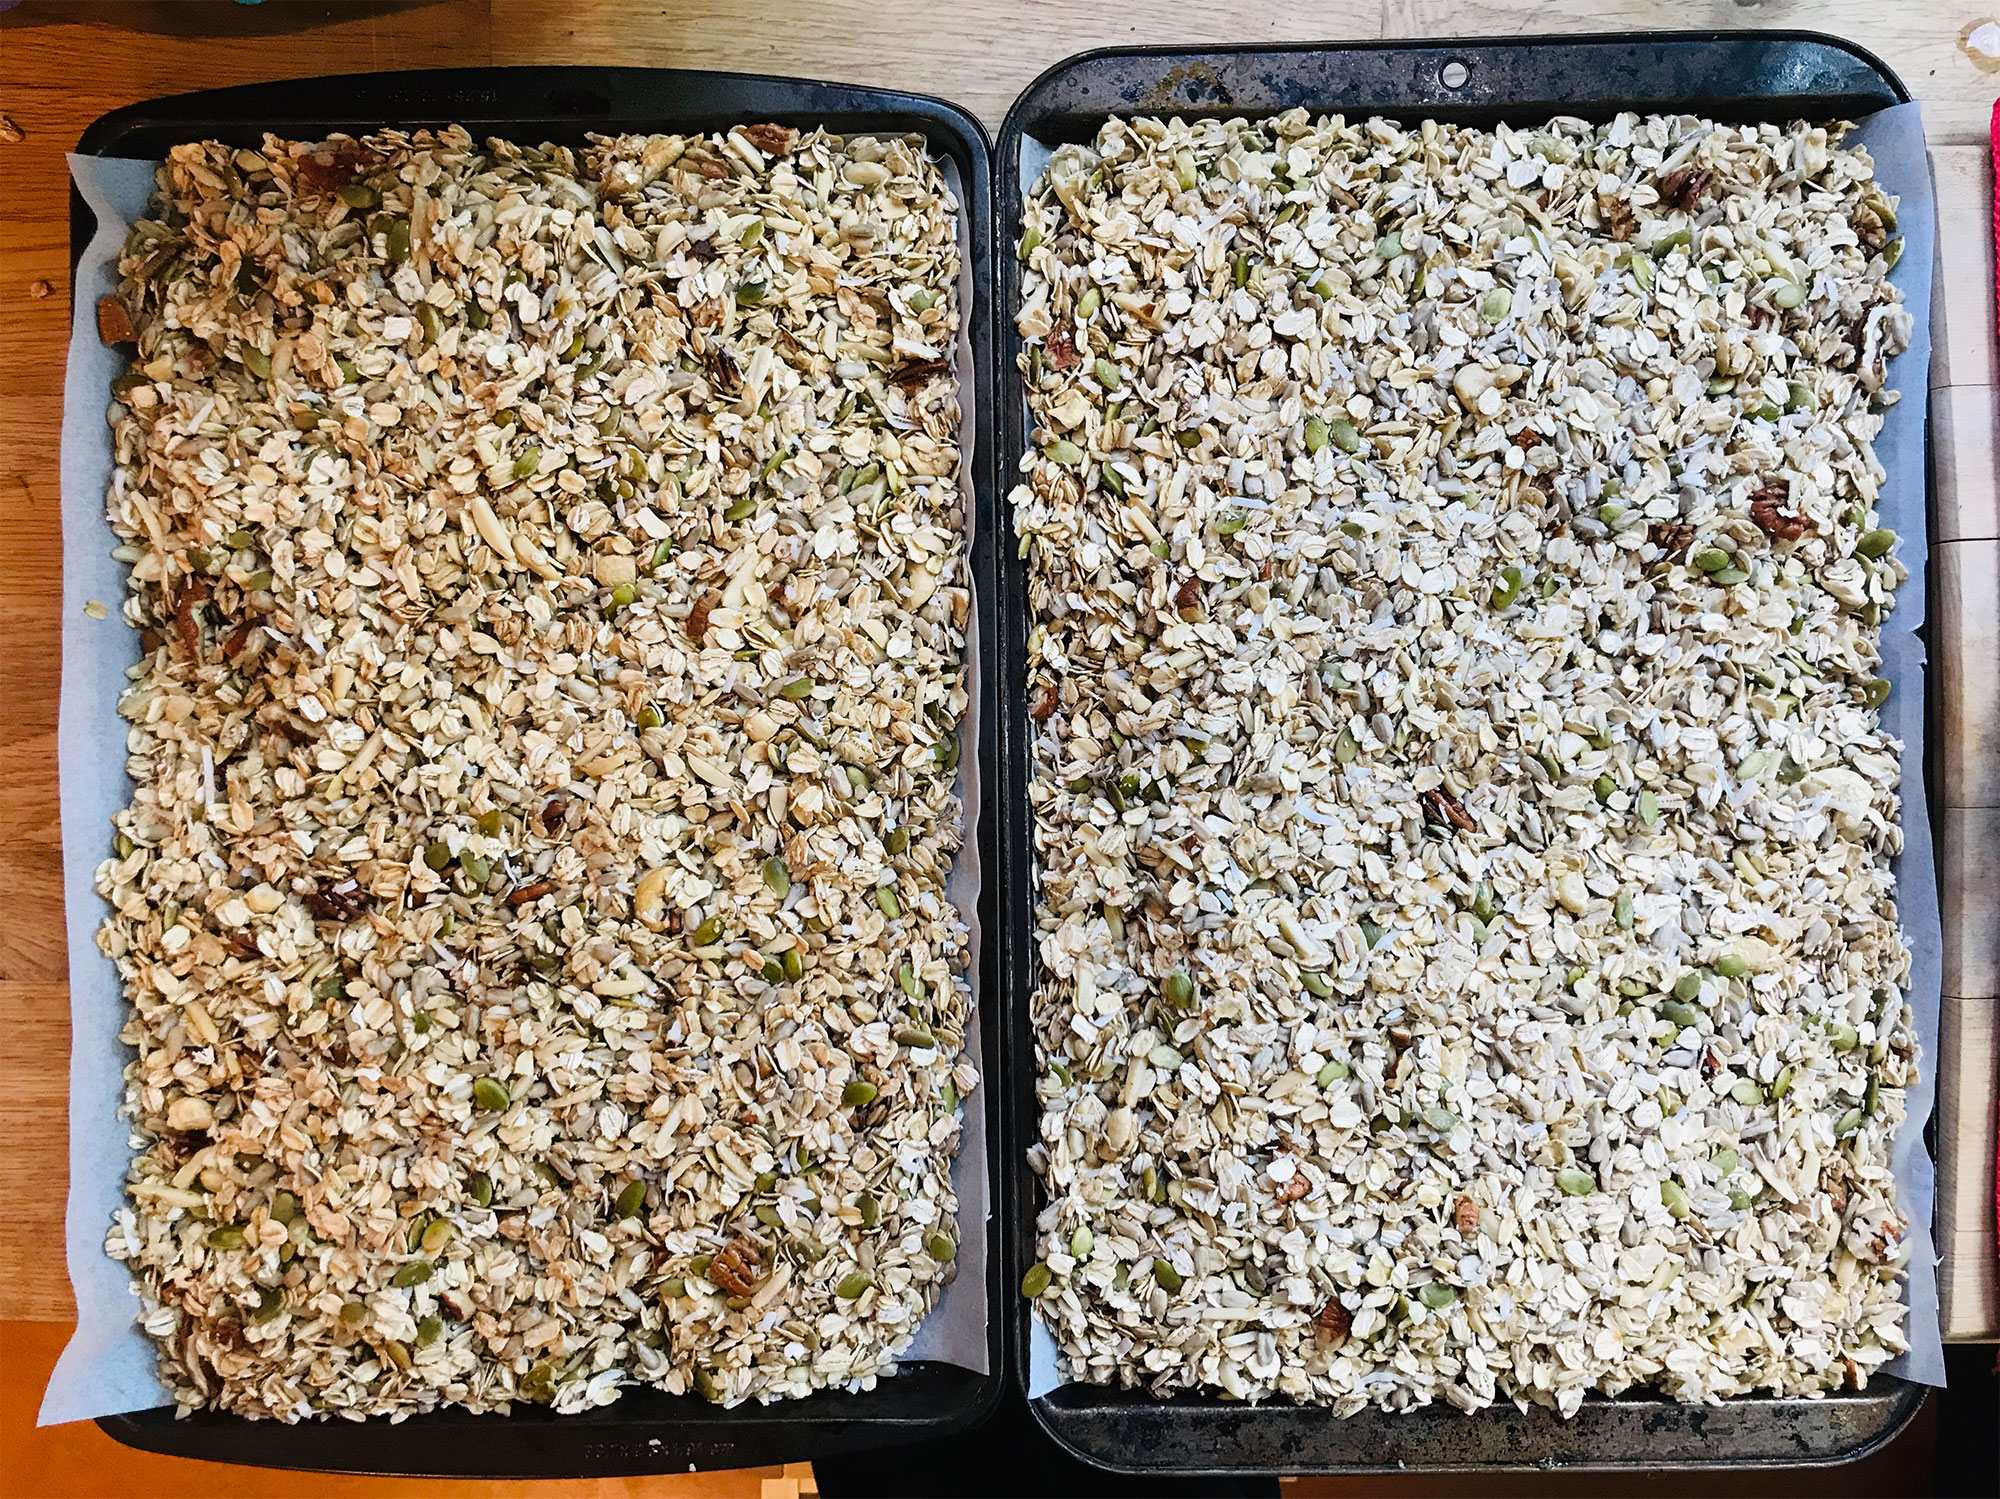 Granola spread on sheet pans ready for the oven